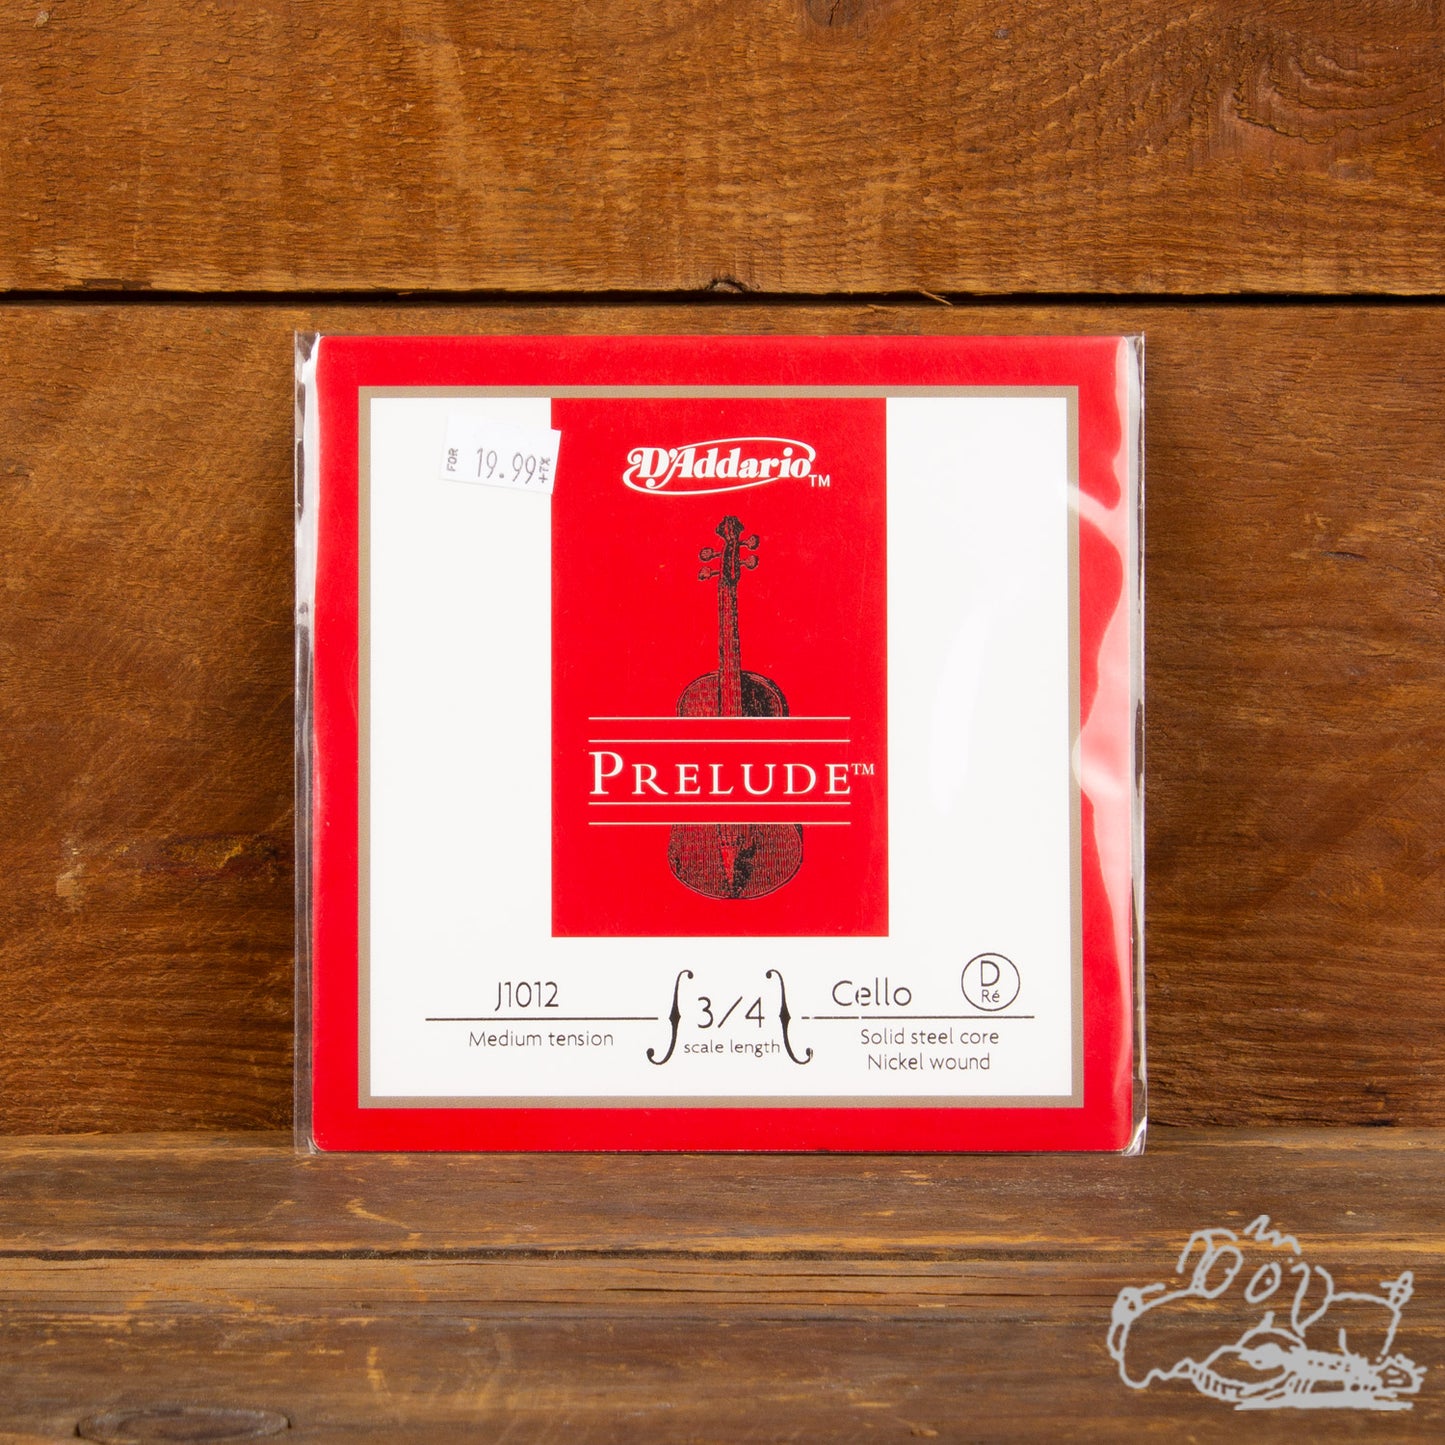 Prelude Cello Strings, 3/4 Scale, Medium Tension (Individual Strings C, G, D, A)